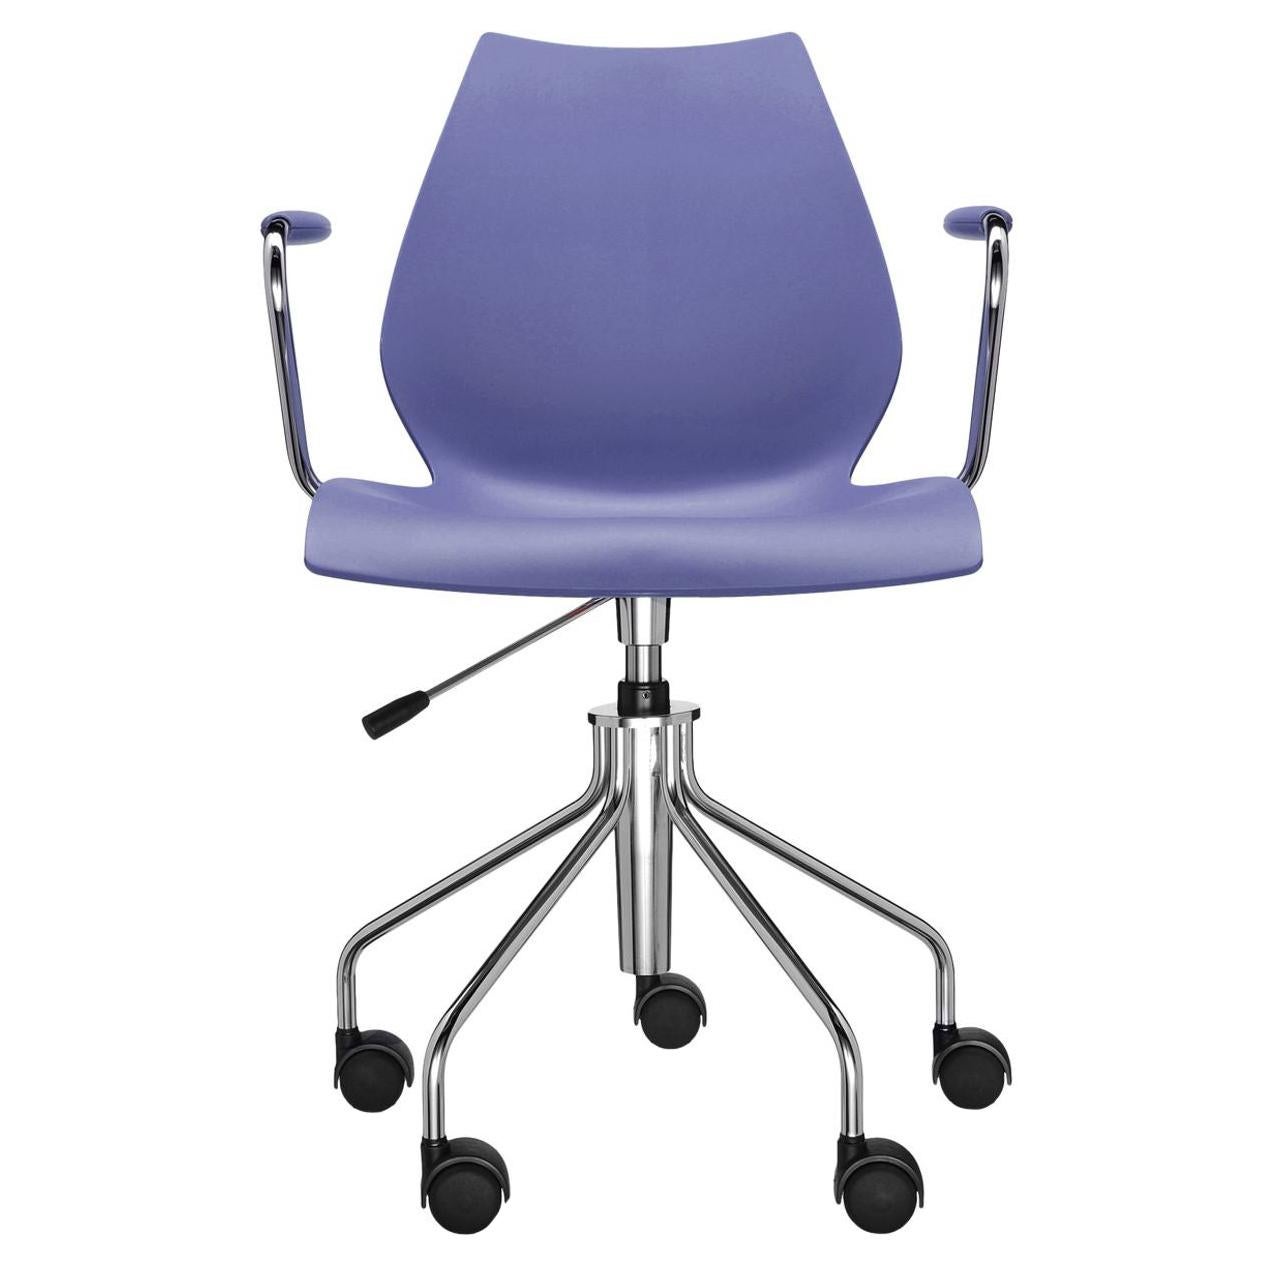 Kartell Maui Swivel Chair Adjustable in Navy Blue by Vico Magistretti